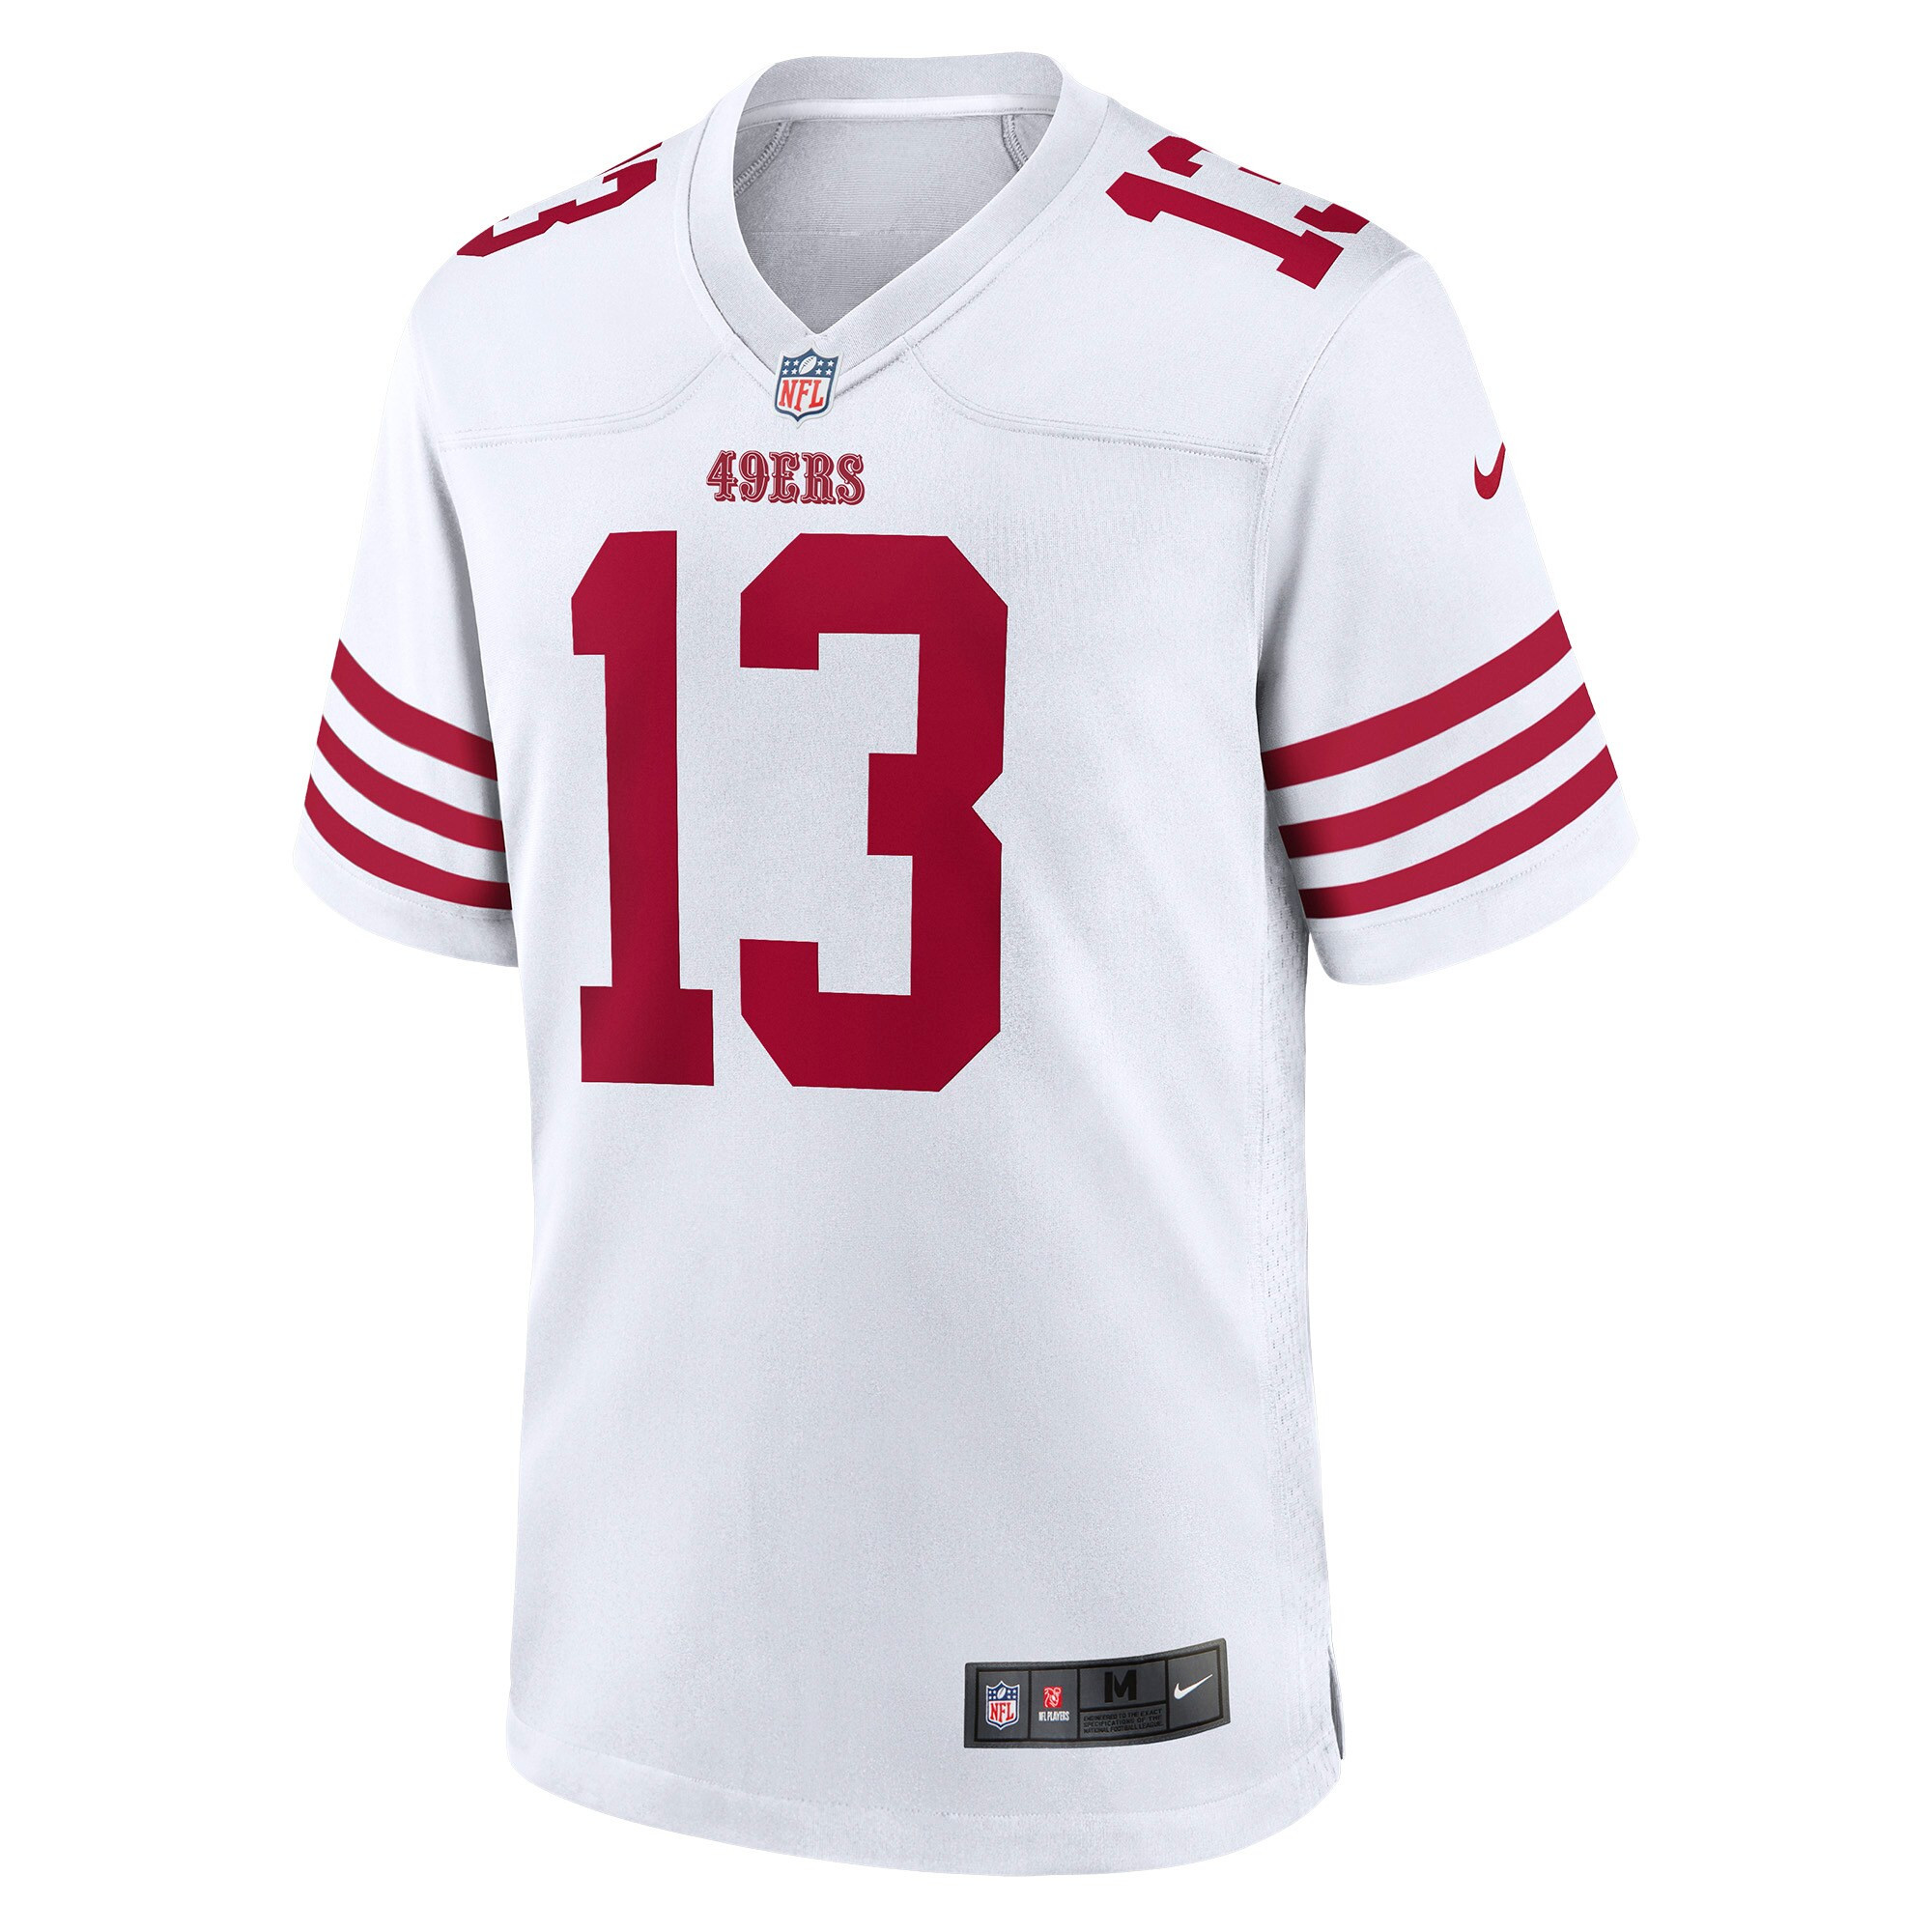 Men's Brock Purdy San Francisco 49ers Game Player Jersey - White